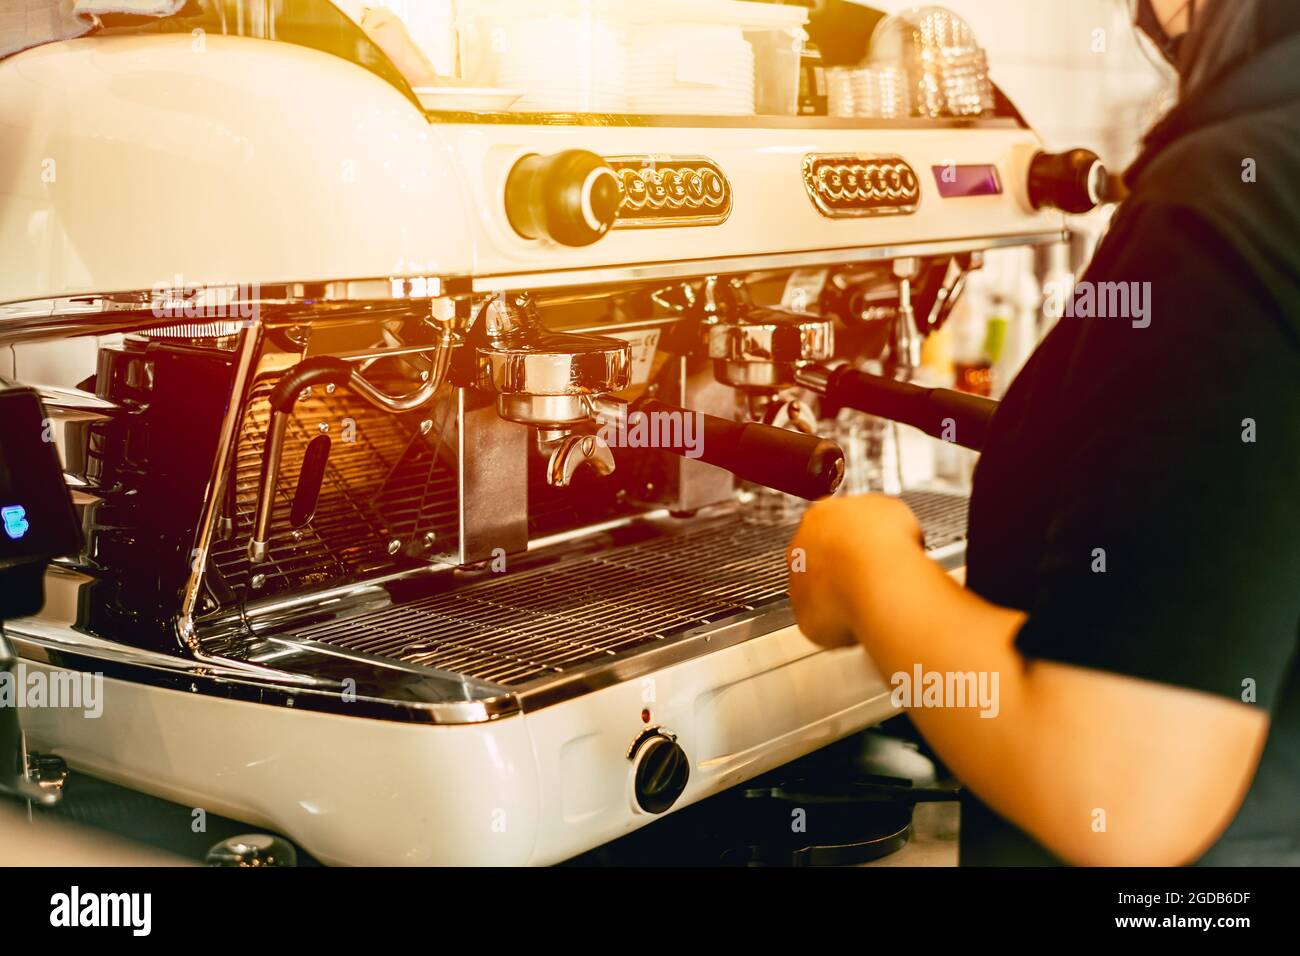 Barista working in cafe with Italian Espresso machine make a coffee image vintage tone. Stock Photo